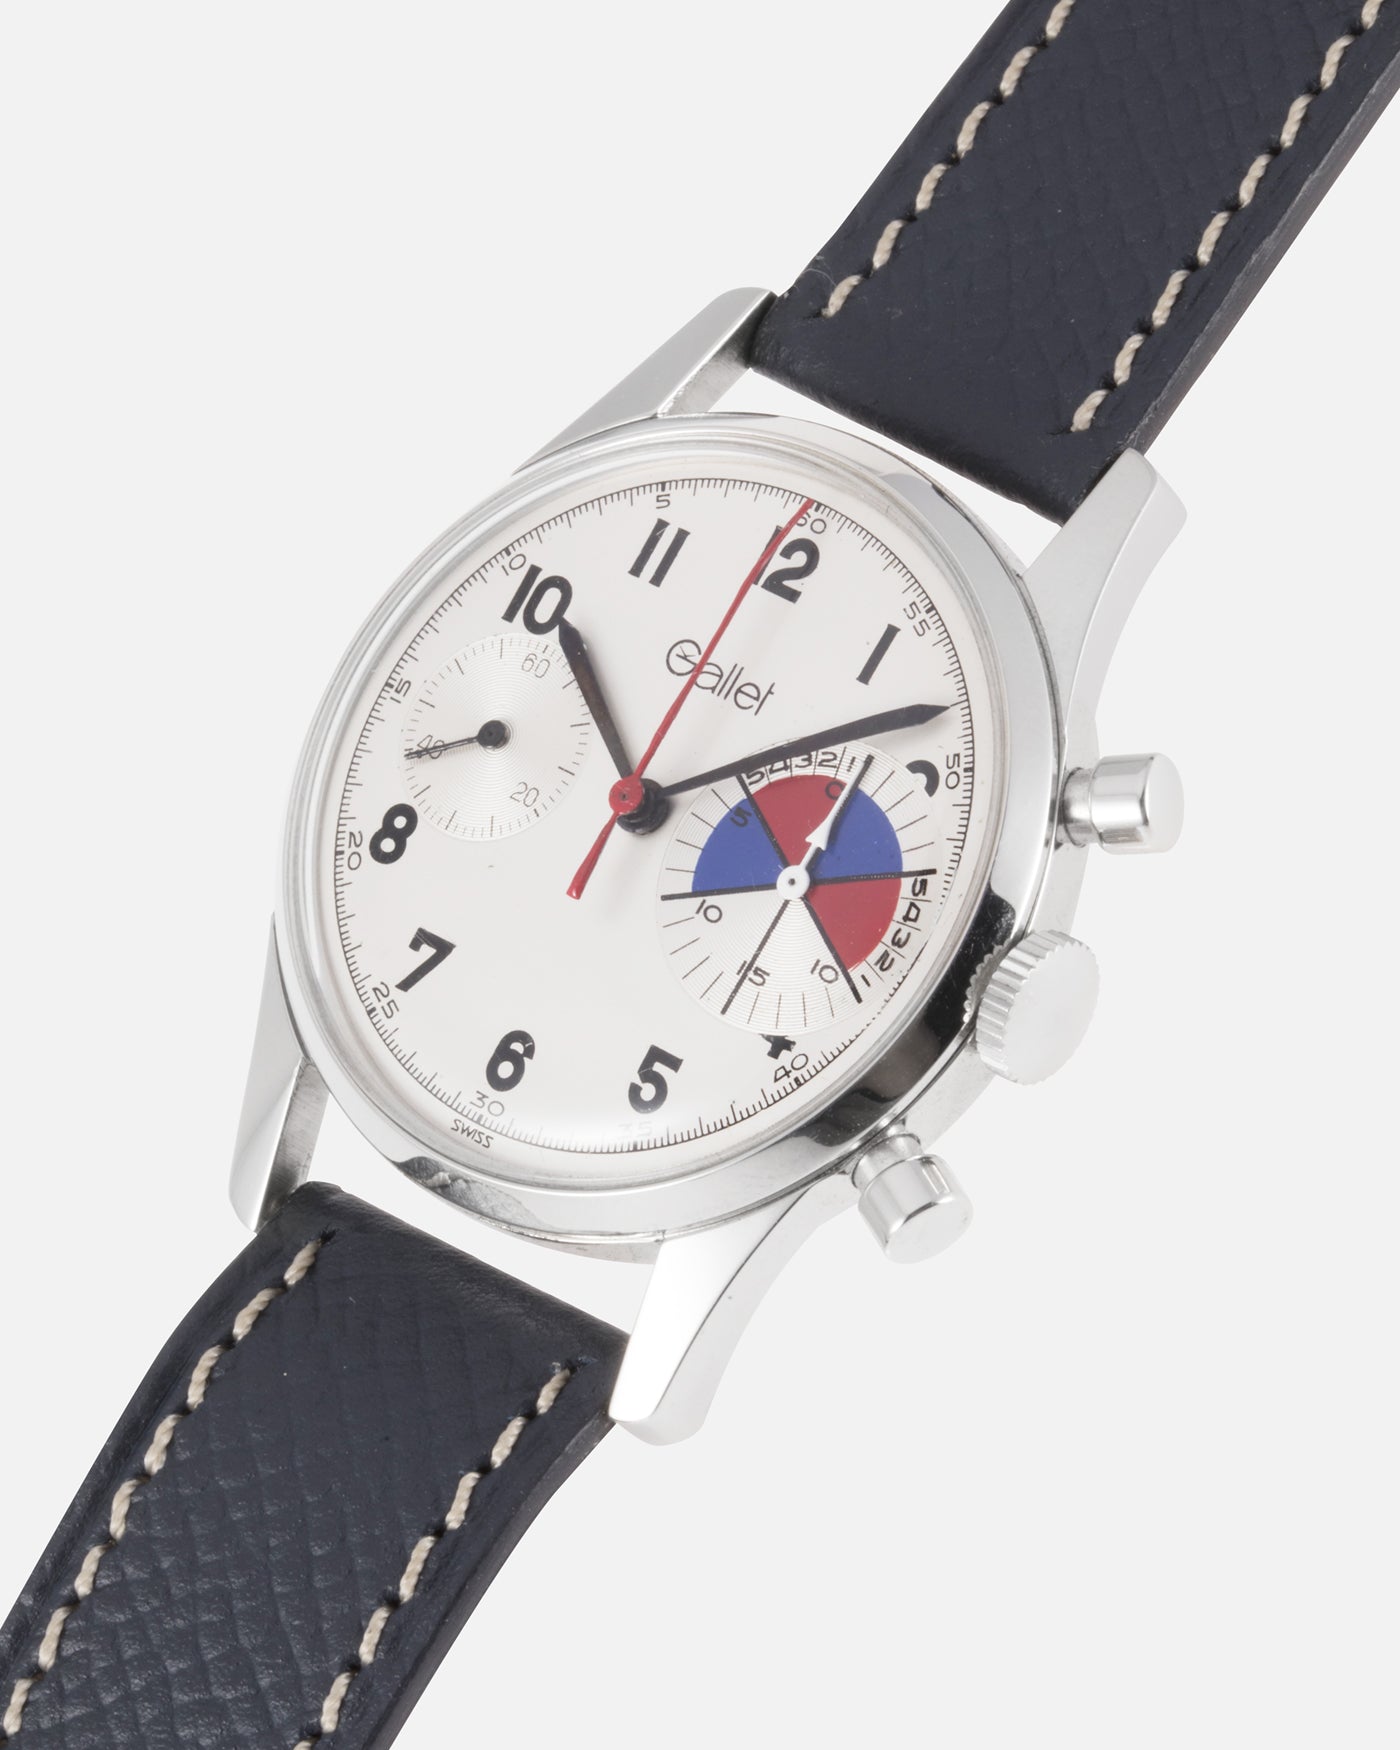 Gallet Multichron Yachting